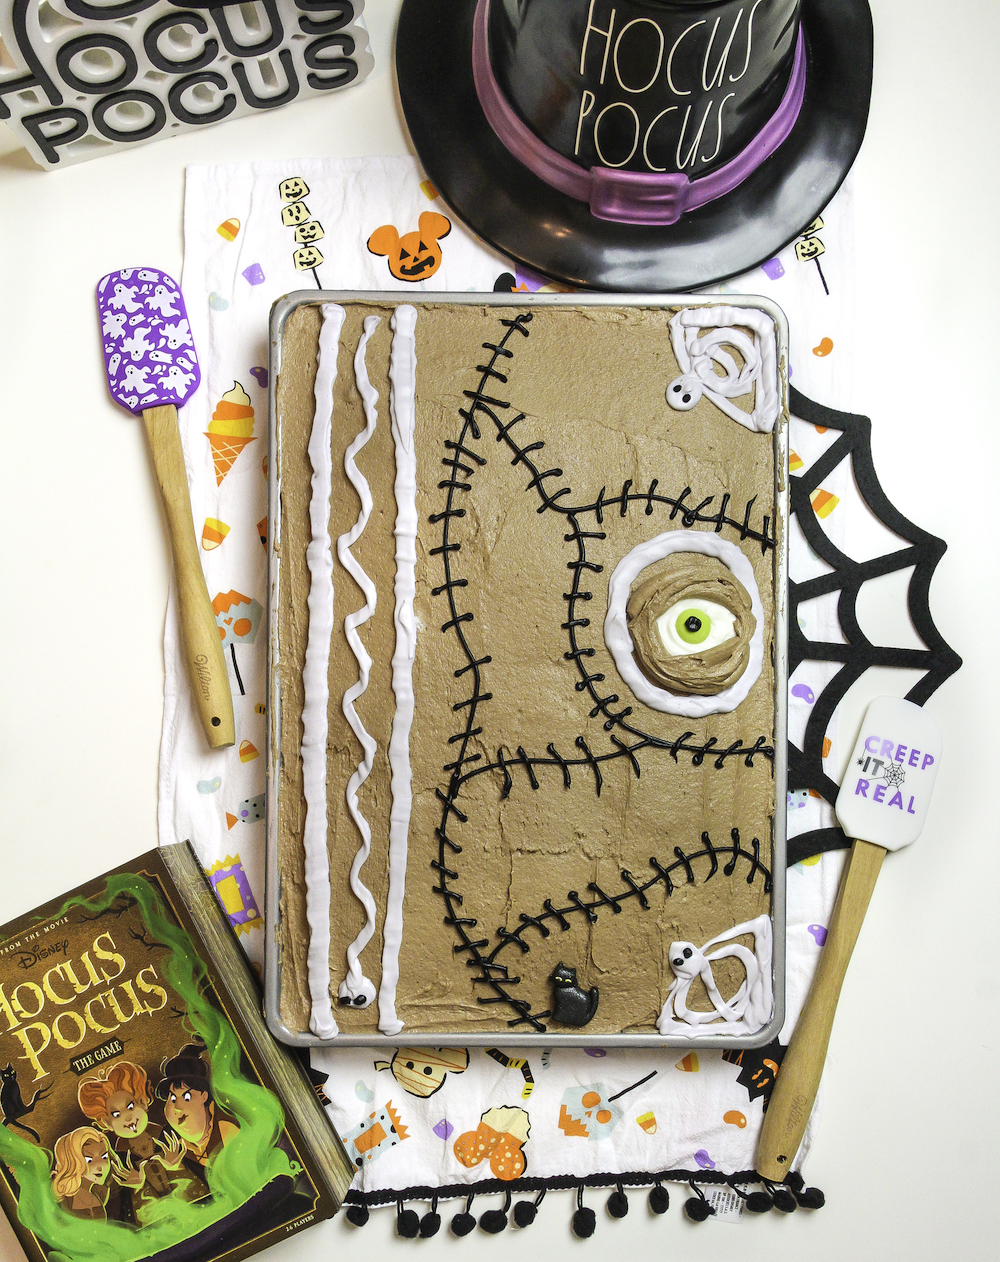 Hocus Pocus Spell Book Sheet Cake! - Brite and Bubbly